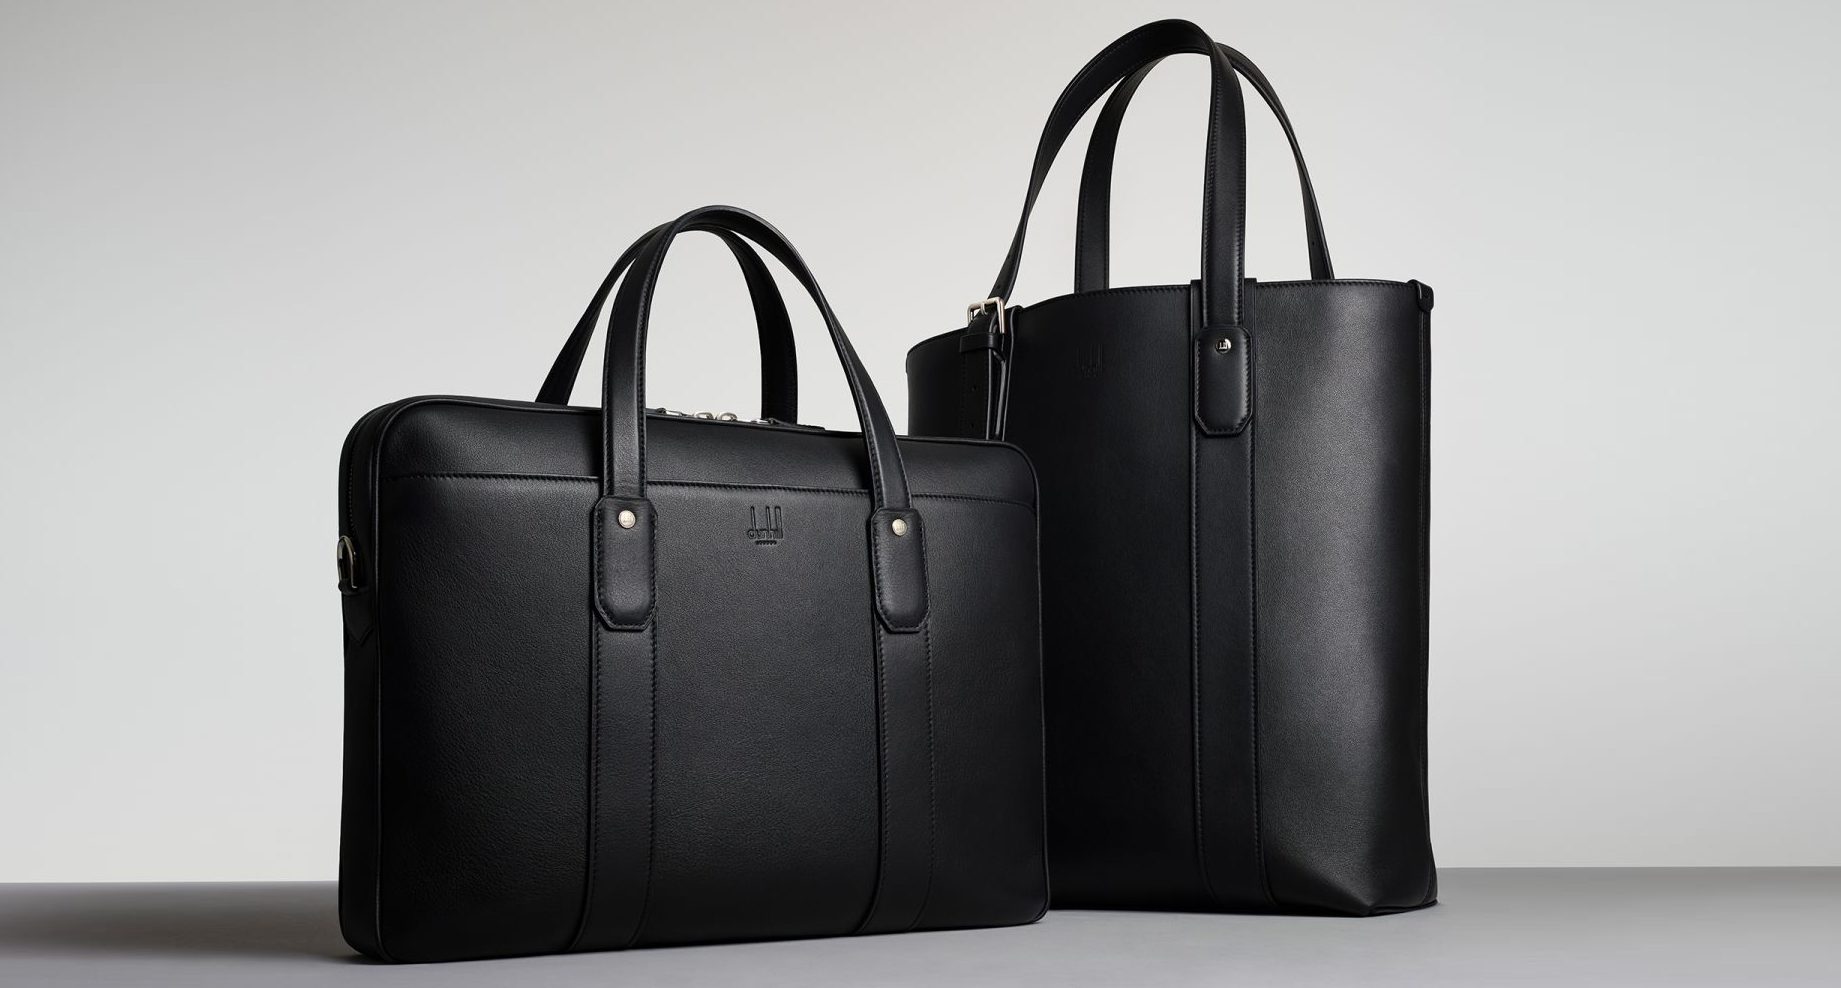 Introducing dunhill's Hampstead and Duke 'Black' collections